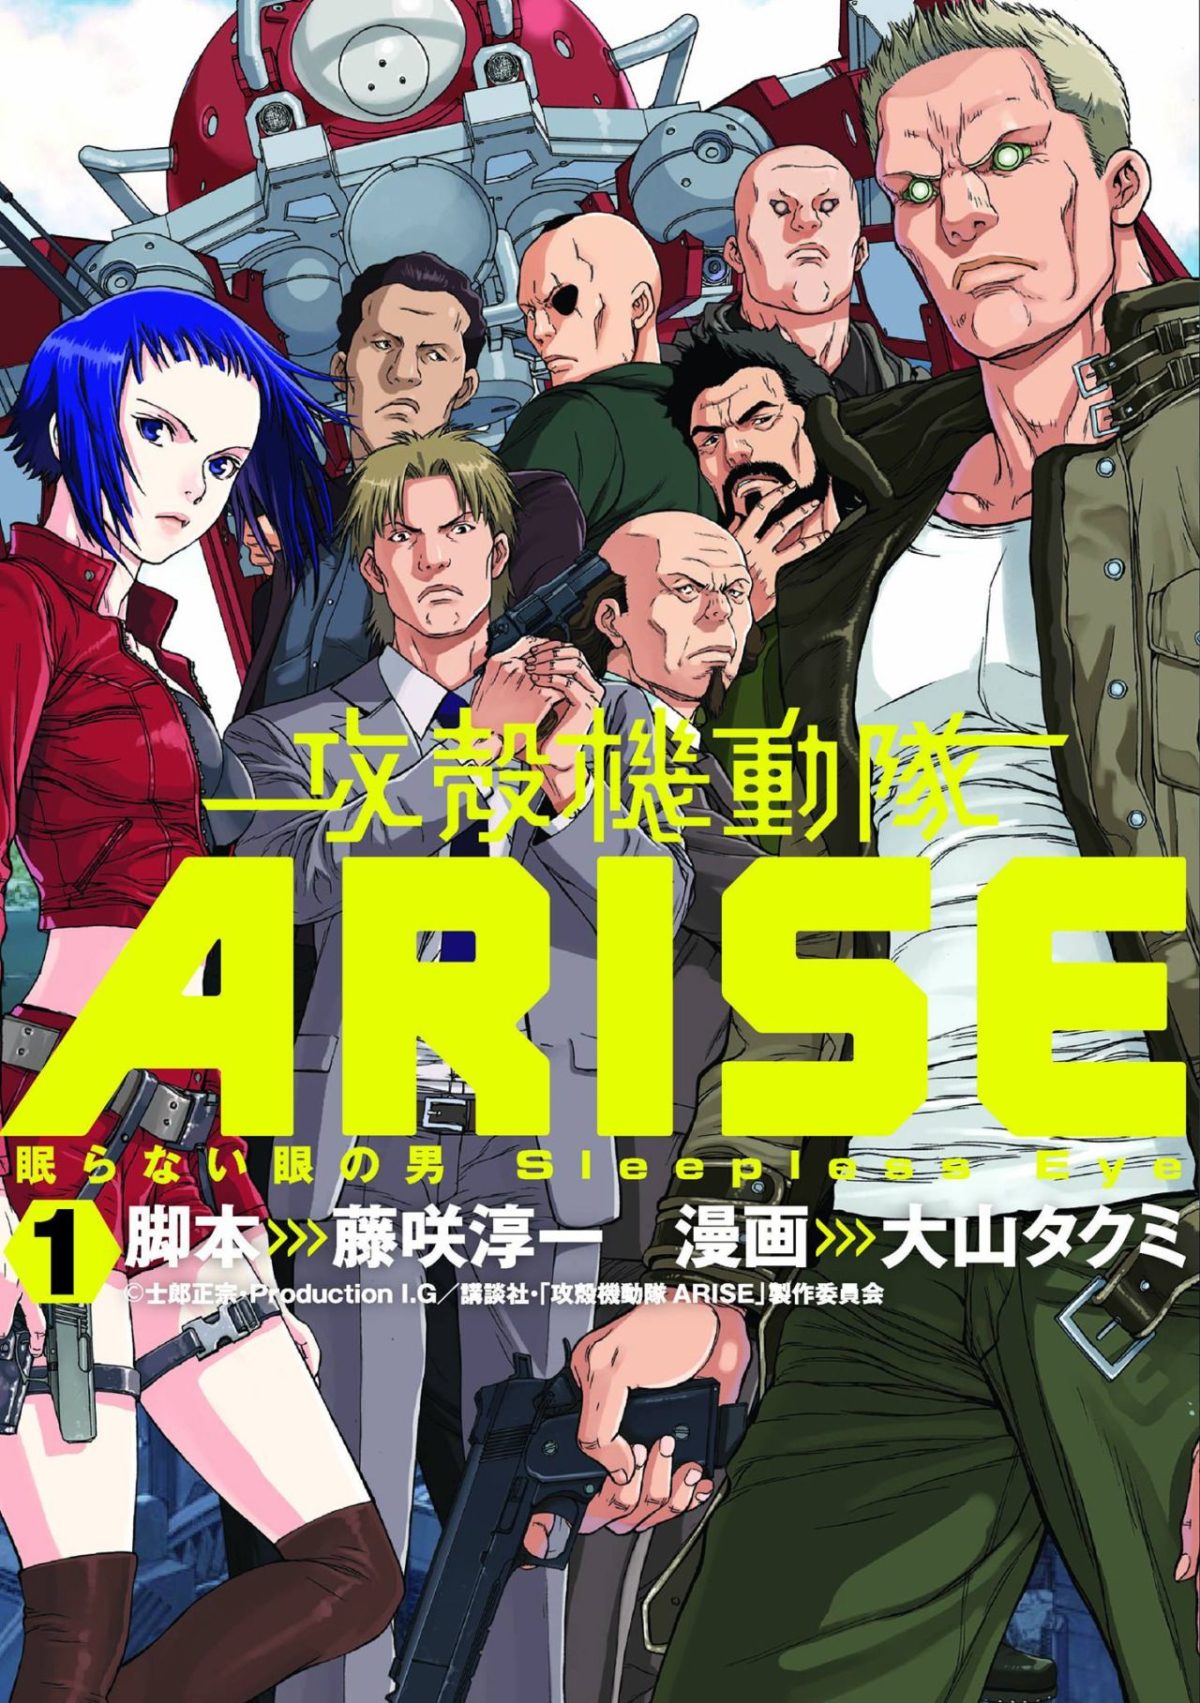 Ghost in the Shell Arise - Sleepless Eye